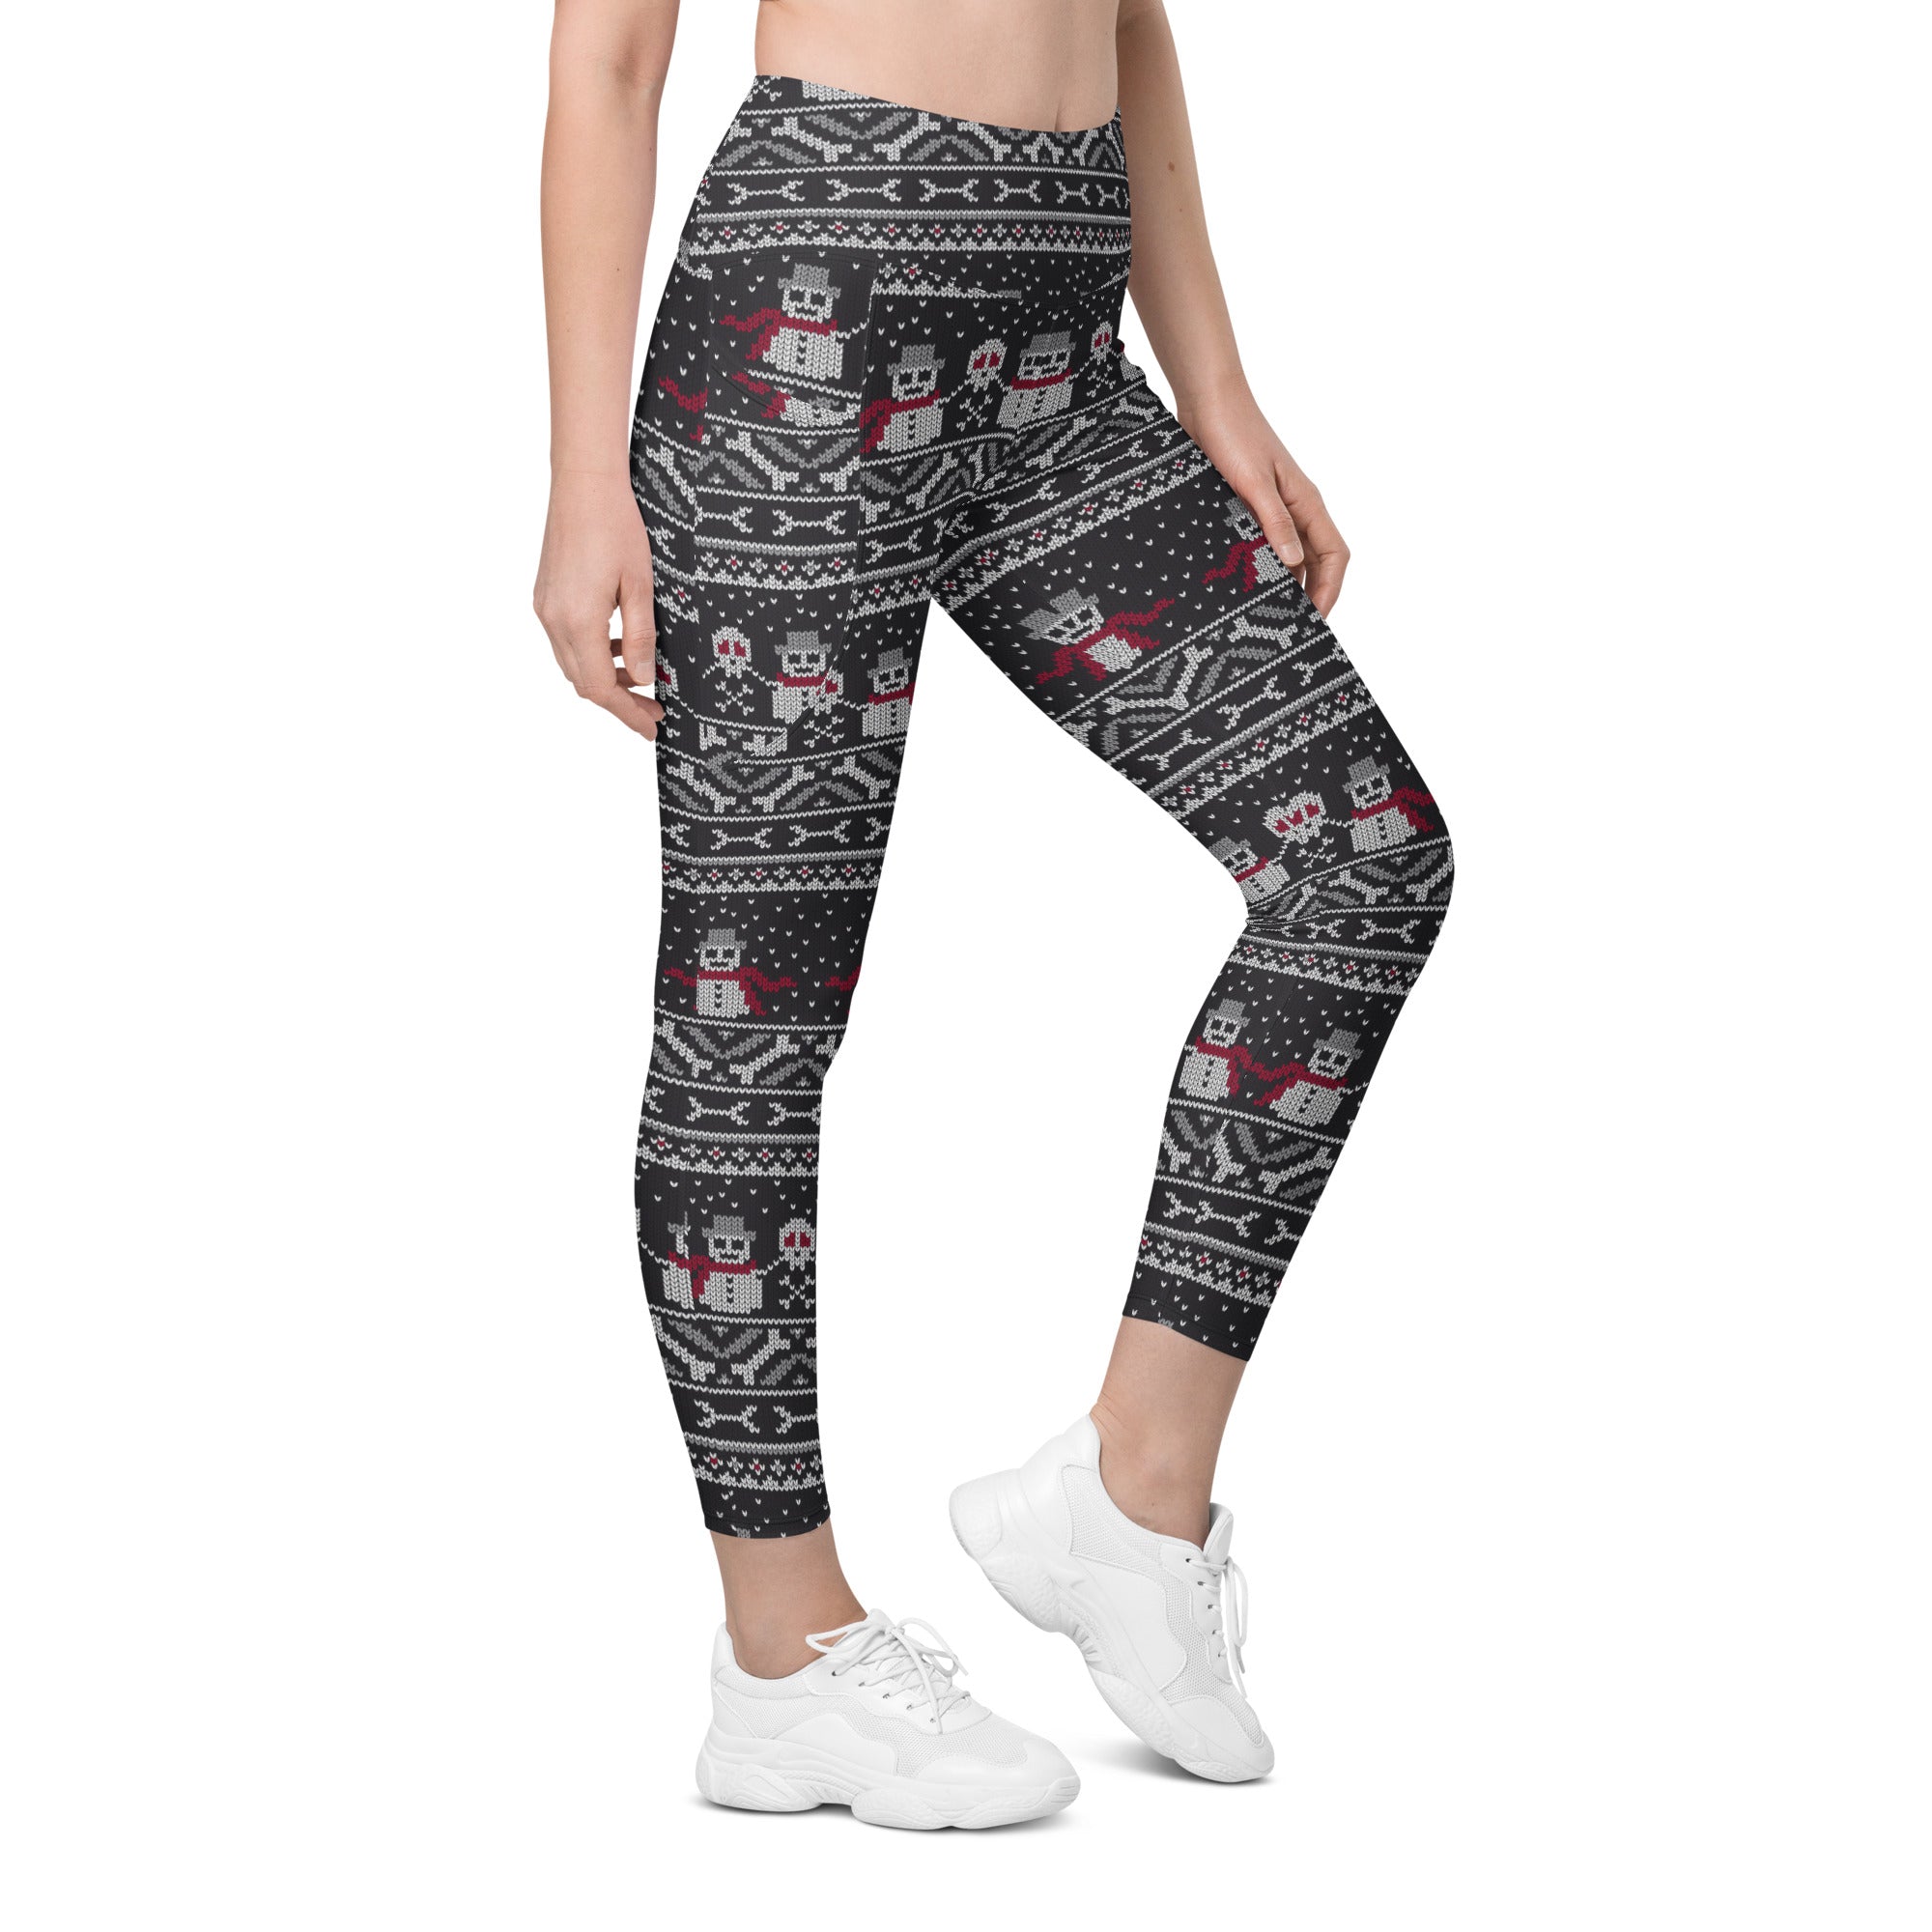 Vintage Goth Knitted Print Leggings With Pockets: Women's